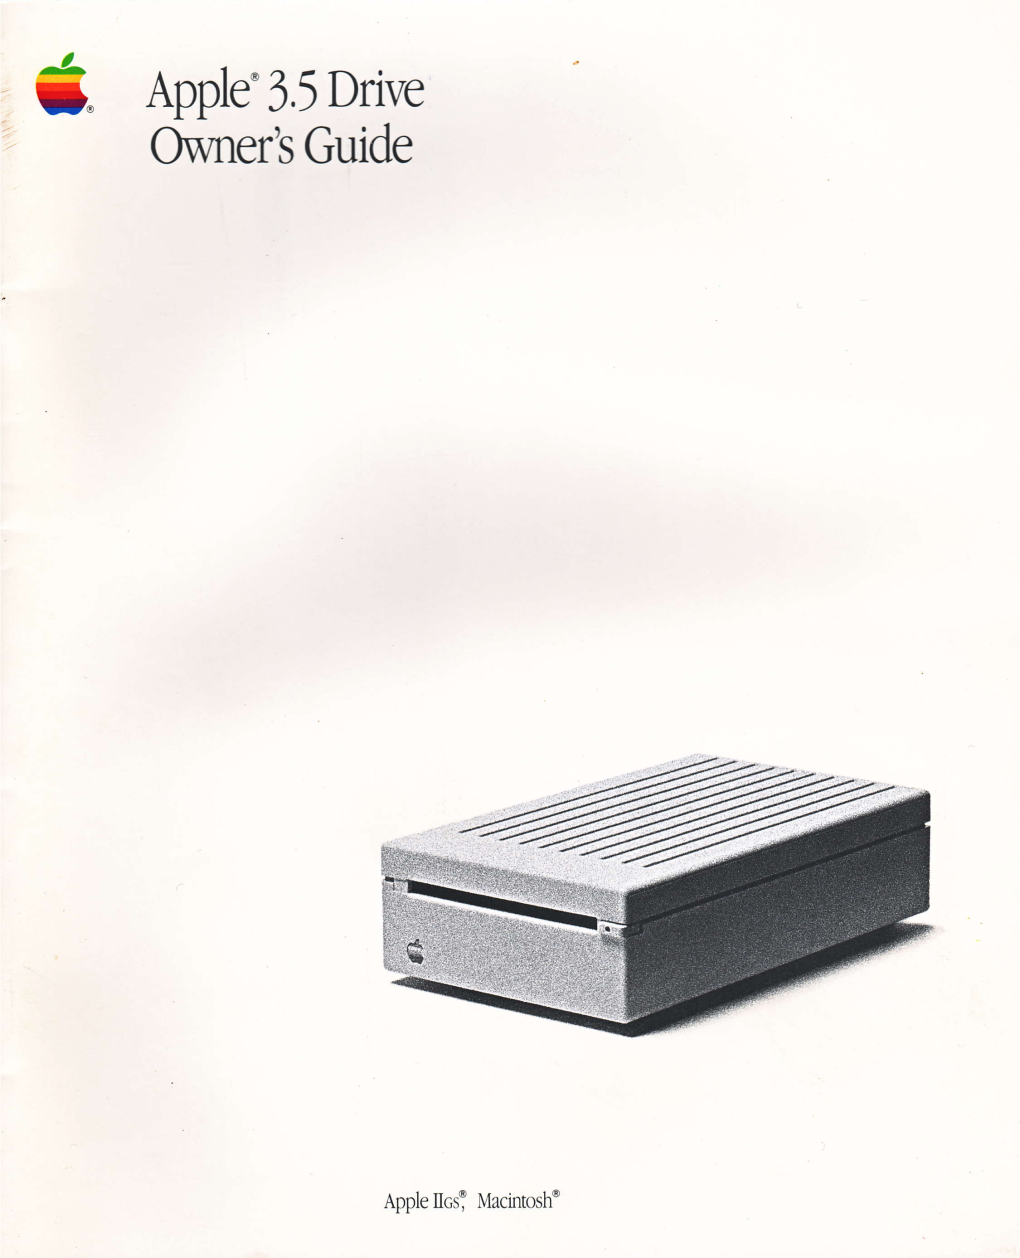 Apple 3.5 Drive Owner's Guide